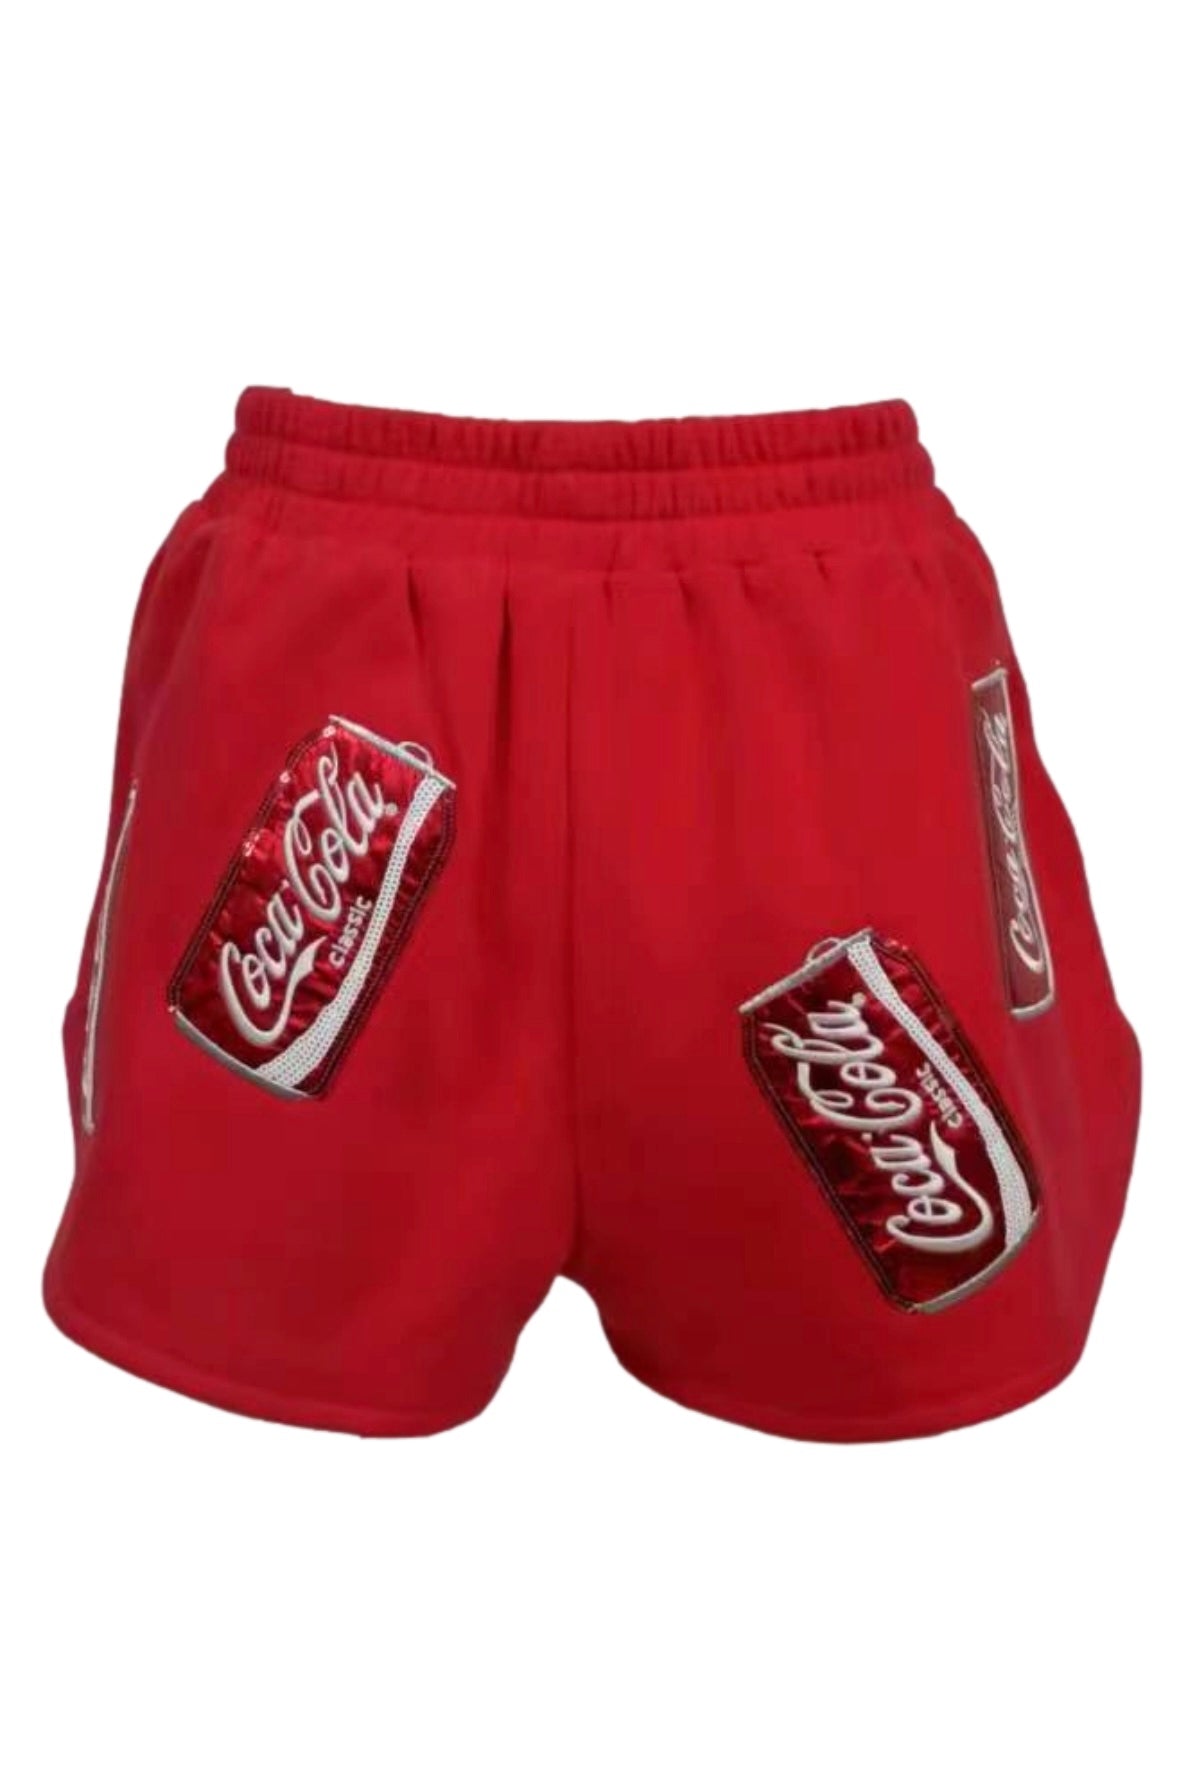 Queen of Sparkles Red Scattered Coke Can Short Set